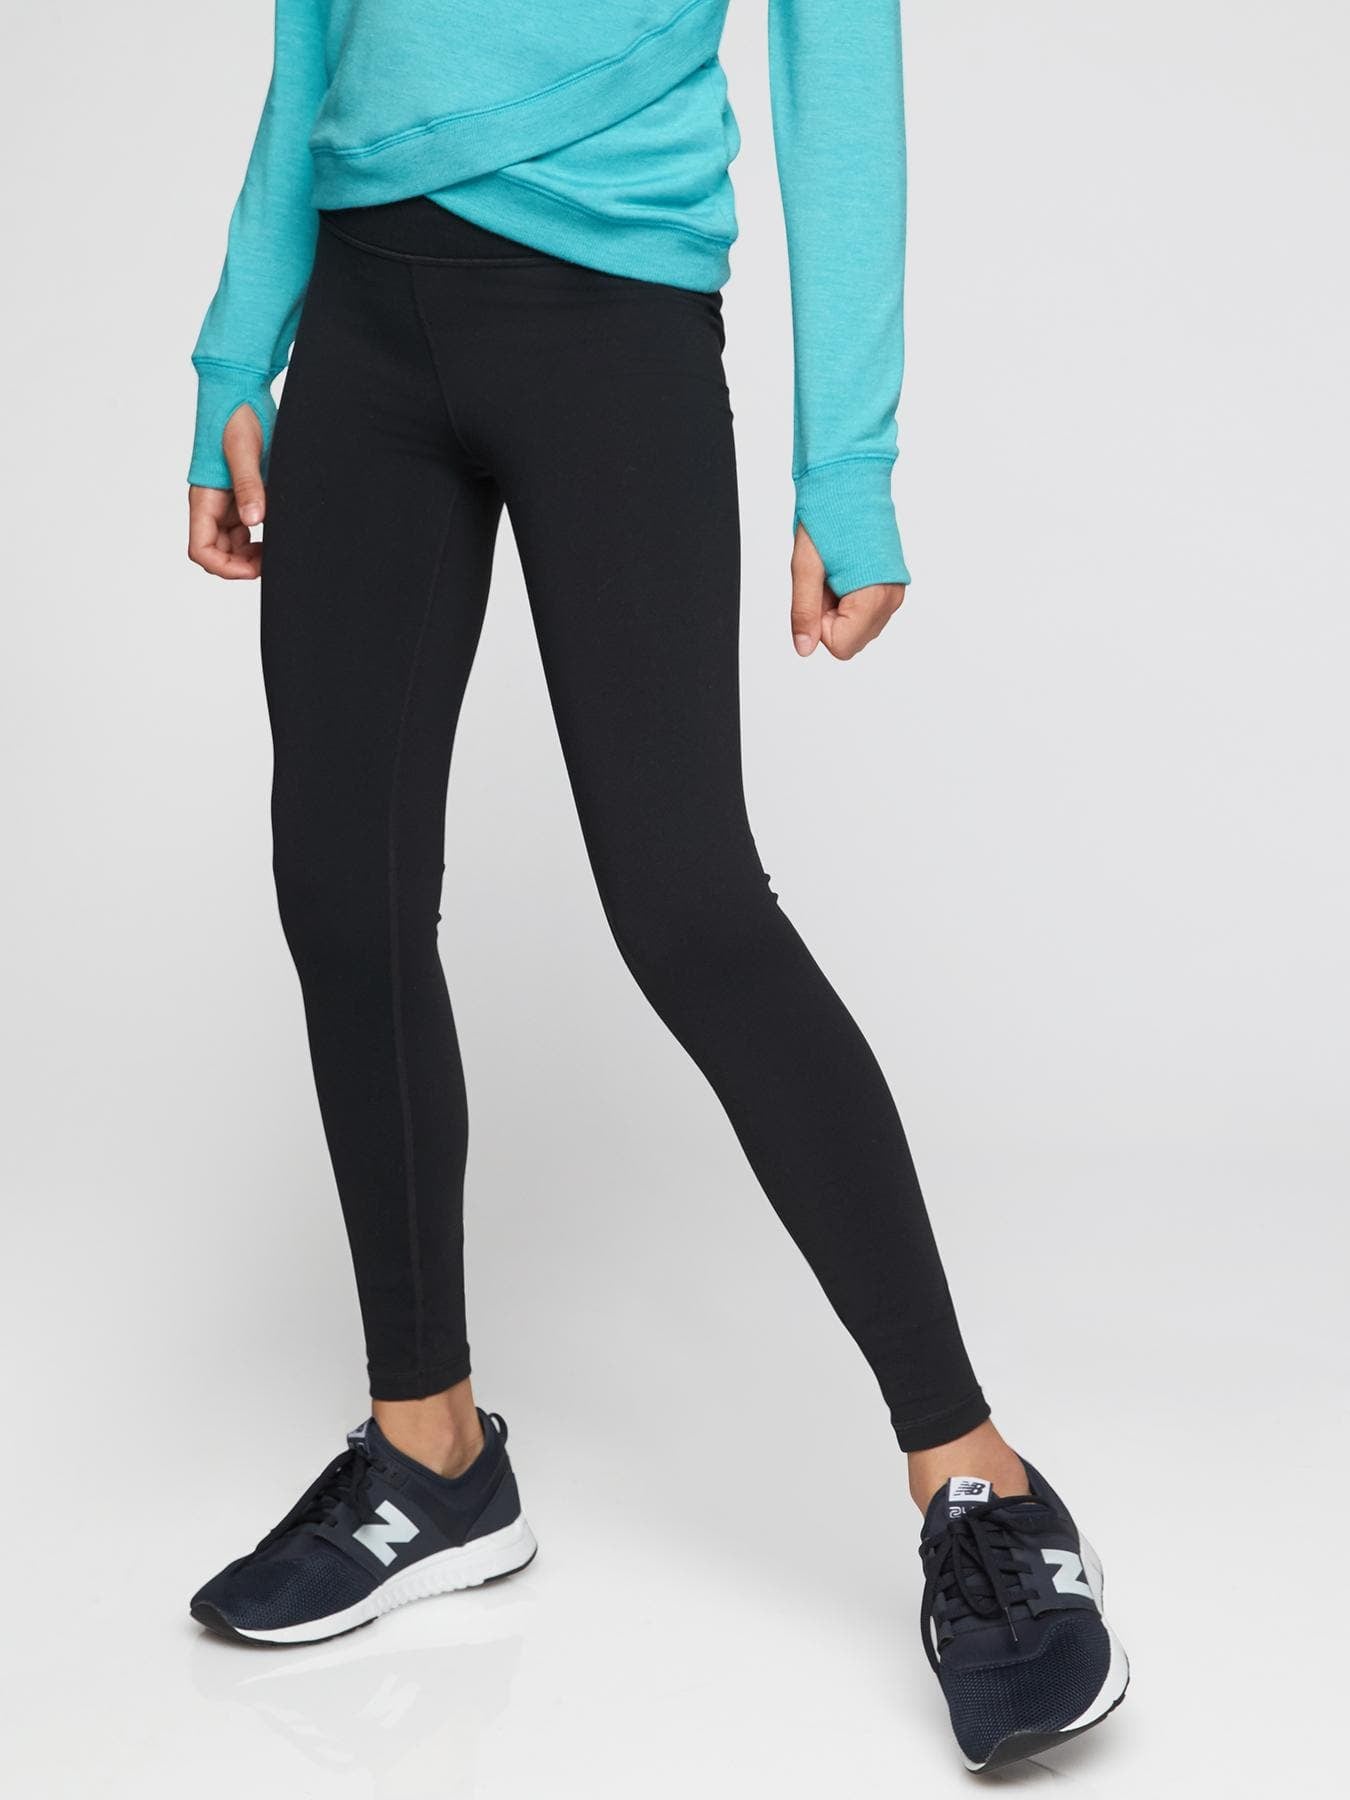 Athleta Girl Chit Chat Tight 2.0, 14 Gifts We're Buying Our Daughters This  Year